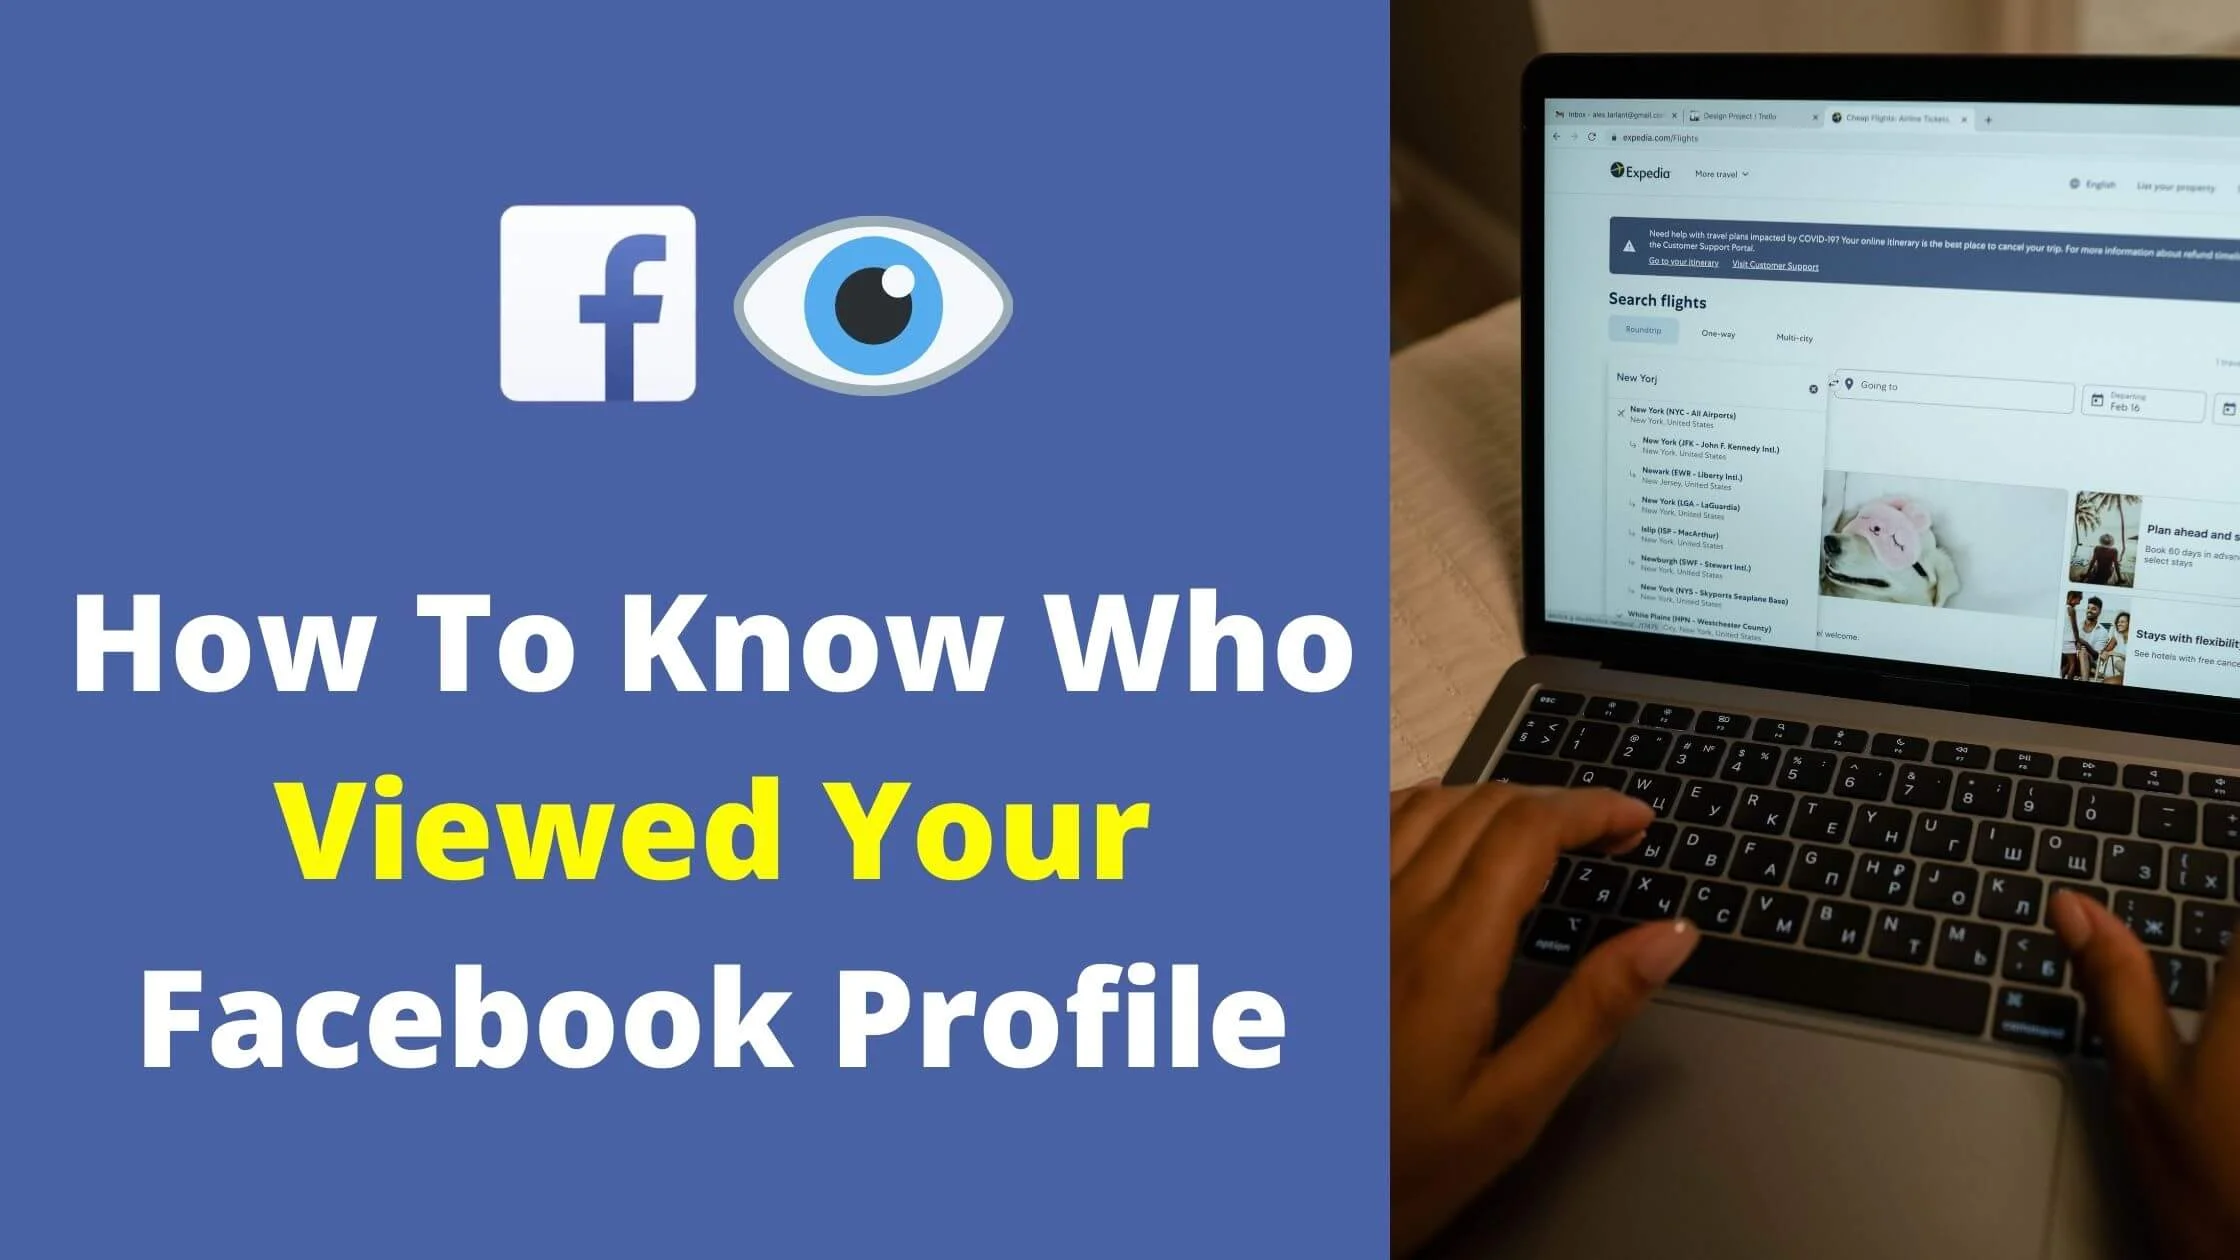 How To Know Who Viewed Your Facebook Profile